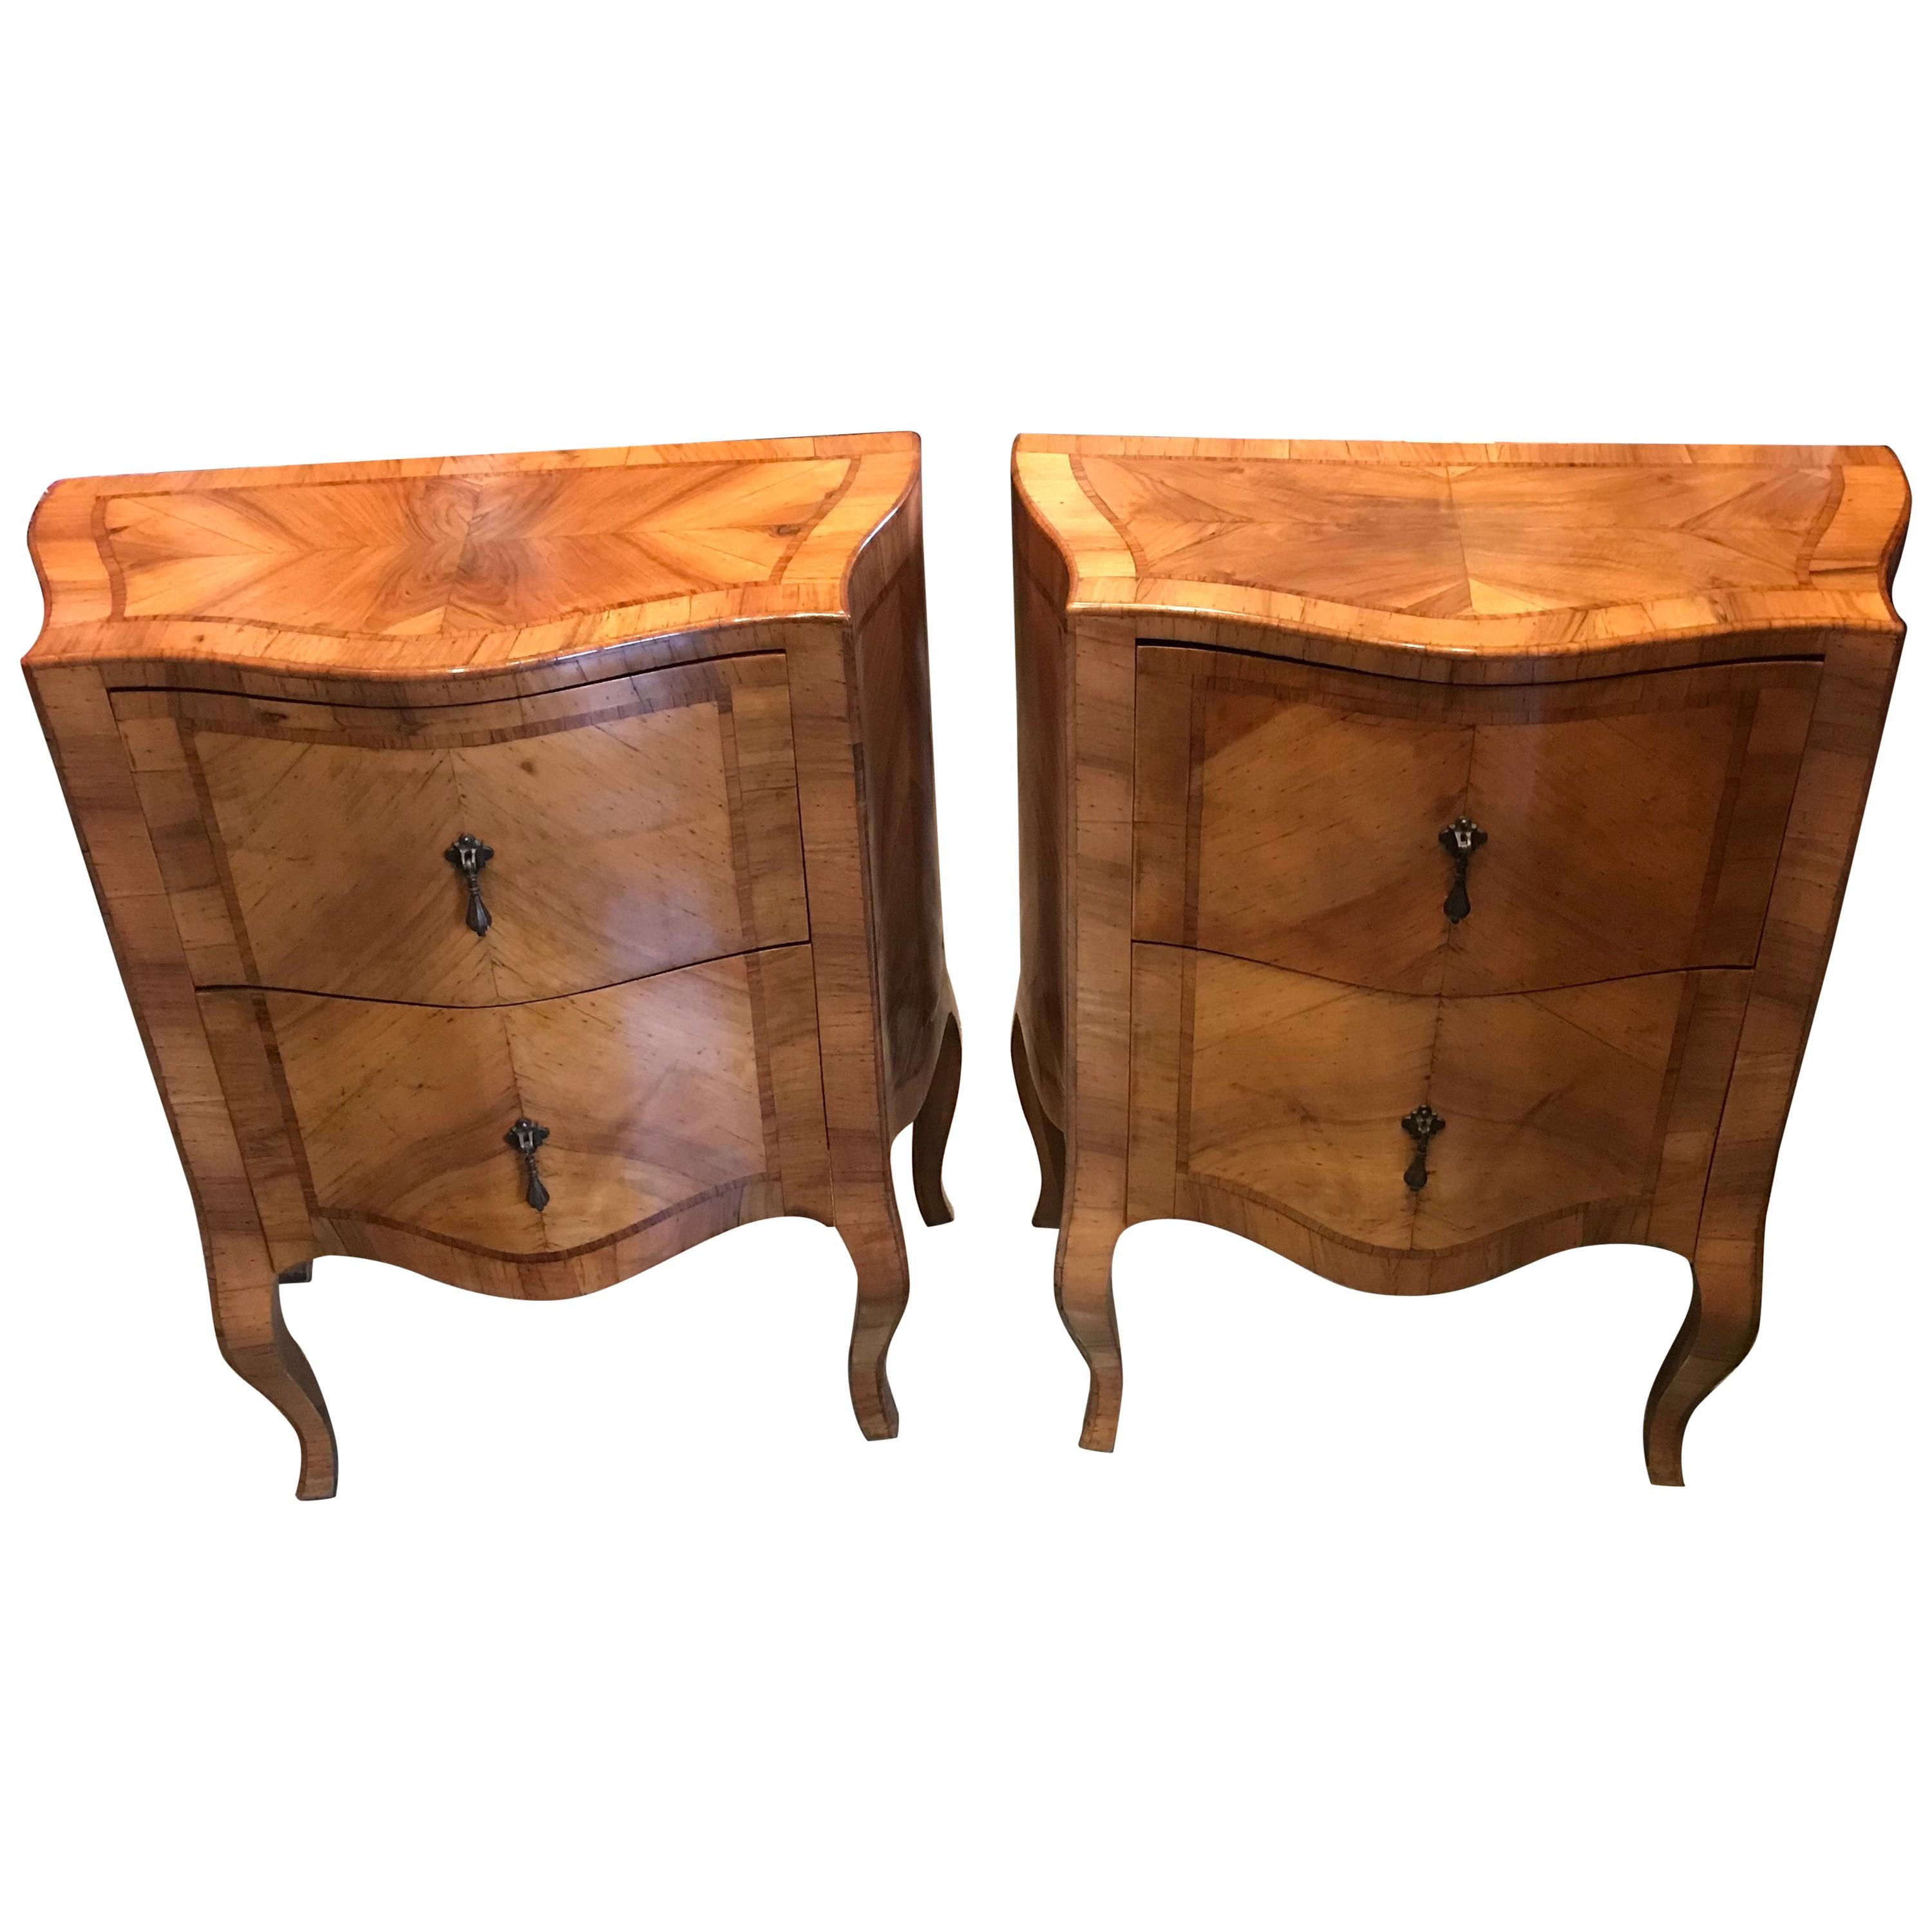 Pair 18th C Carved Italian Inlaid Bed Side Fruit Wood Nightstand Table Comodini For Sale